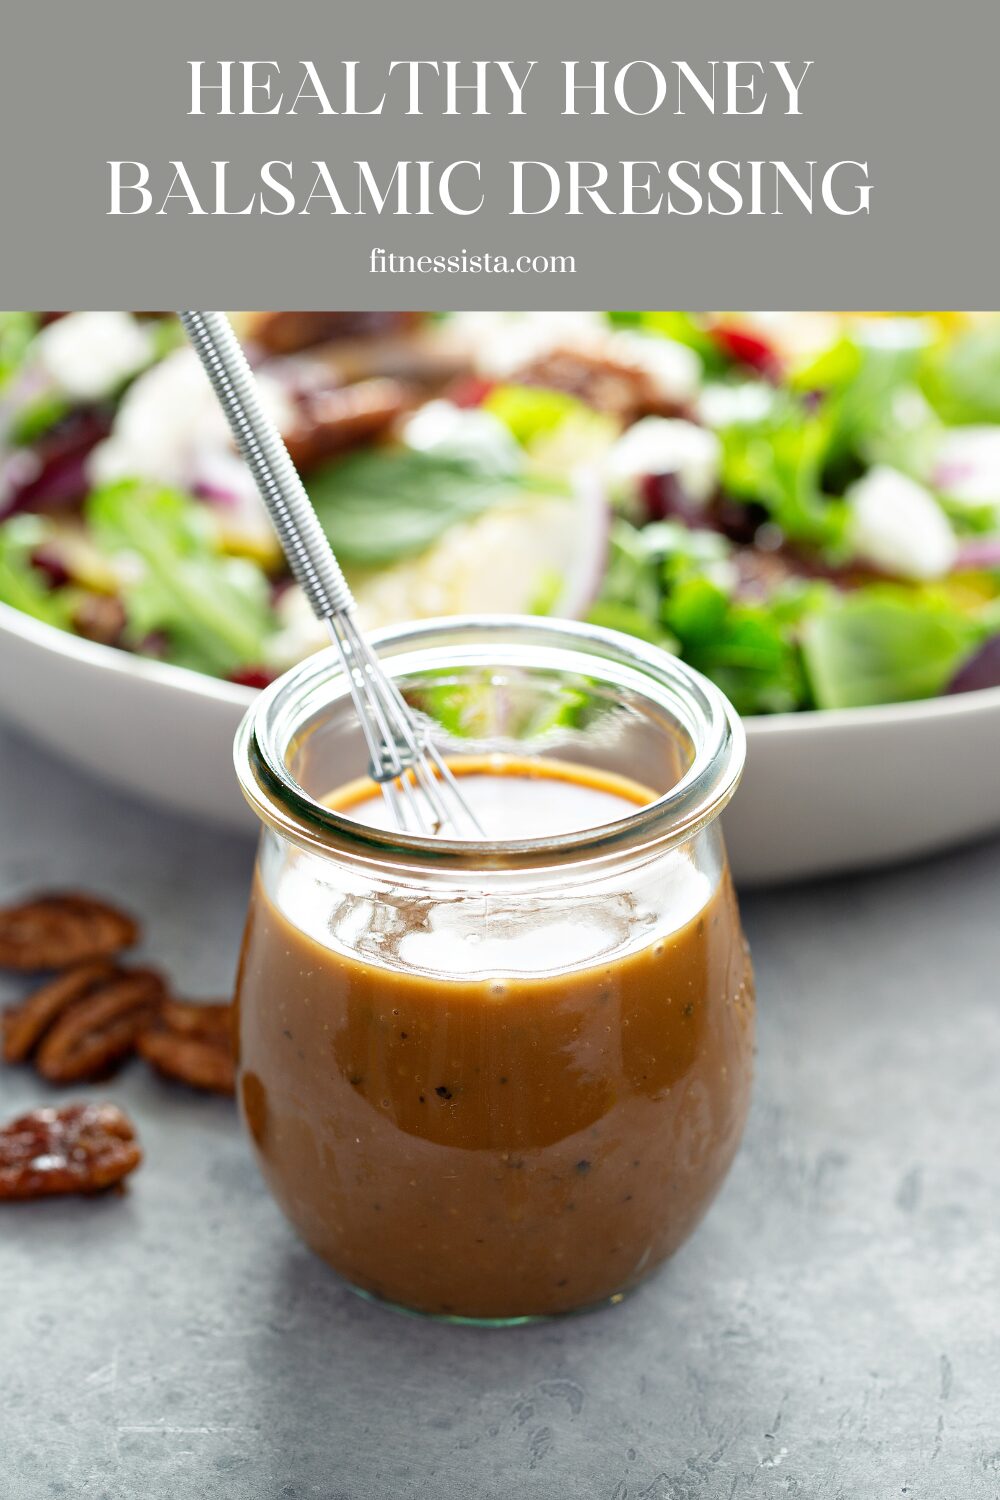 Honey Balsamic Dressing (wholesome) – The Fitnessista